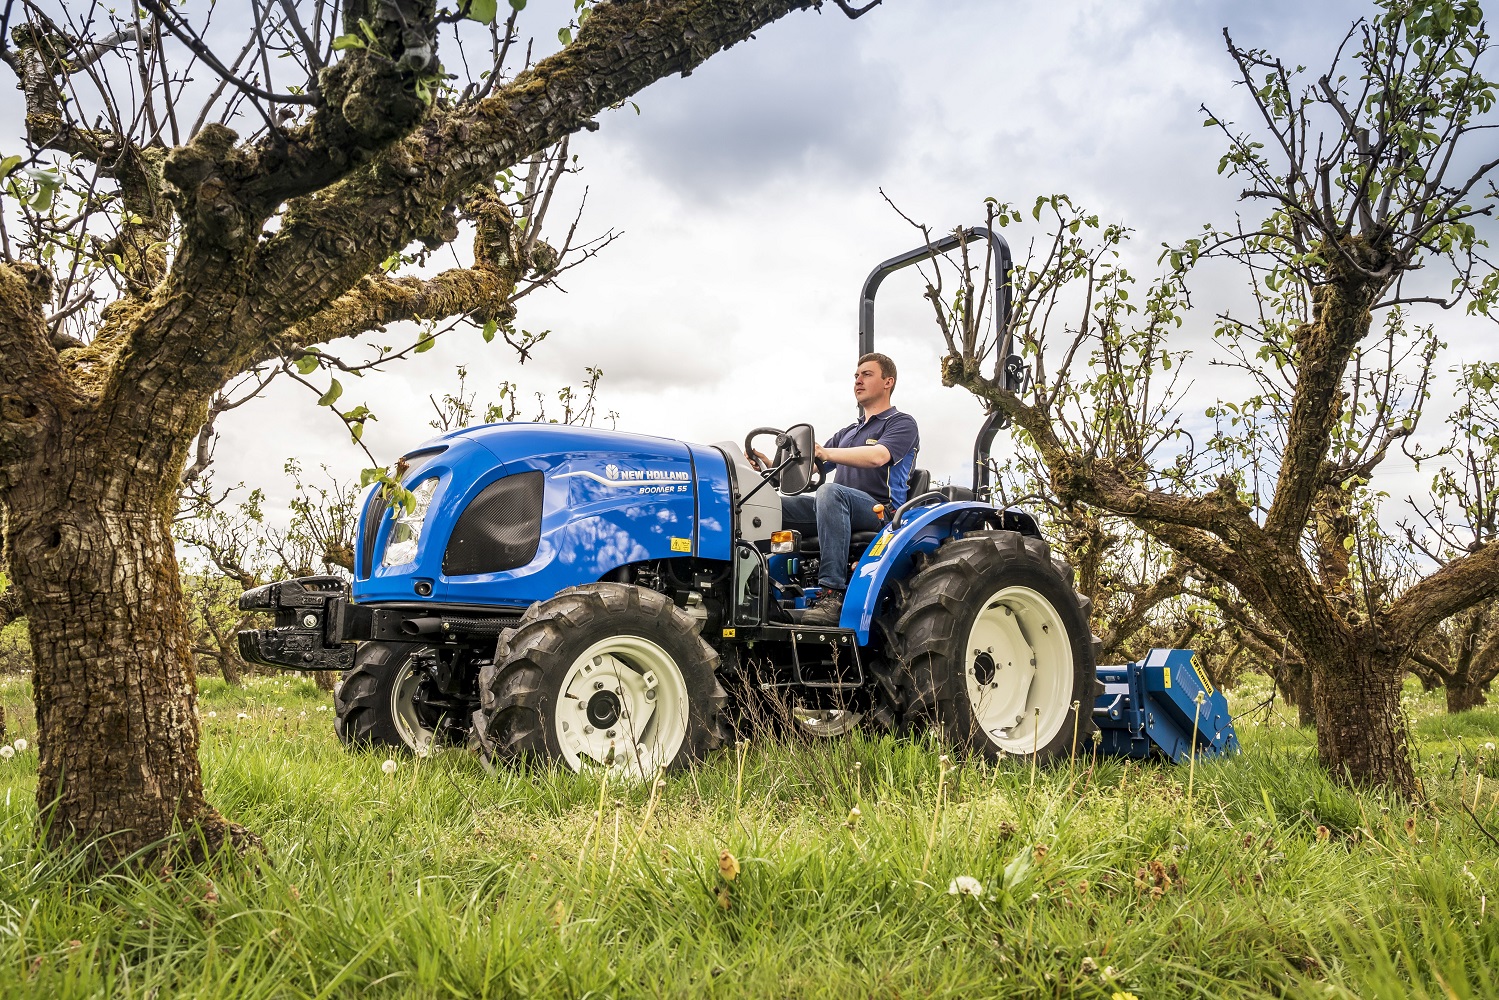 New Holland powers up its compact tractor offering with launch of